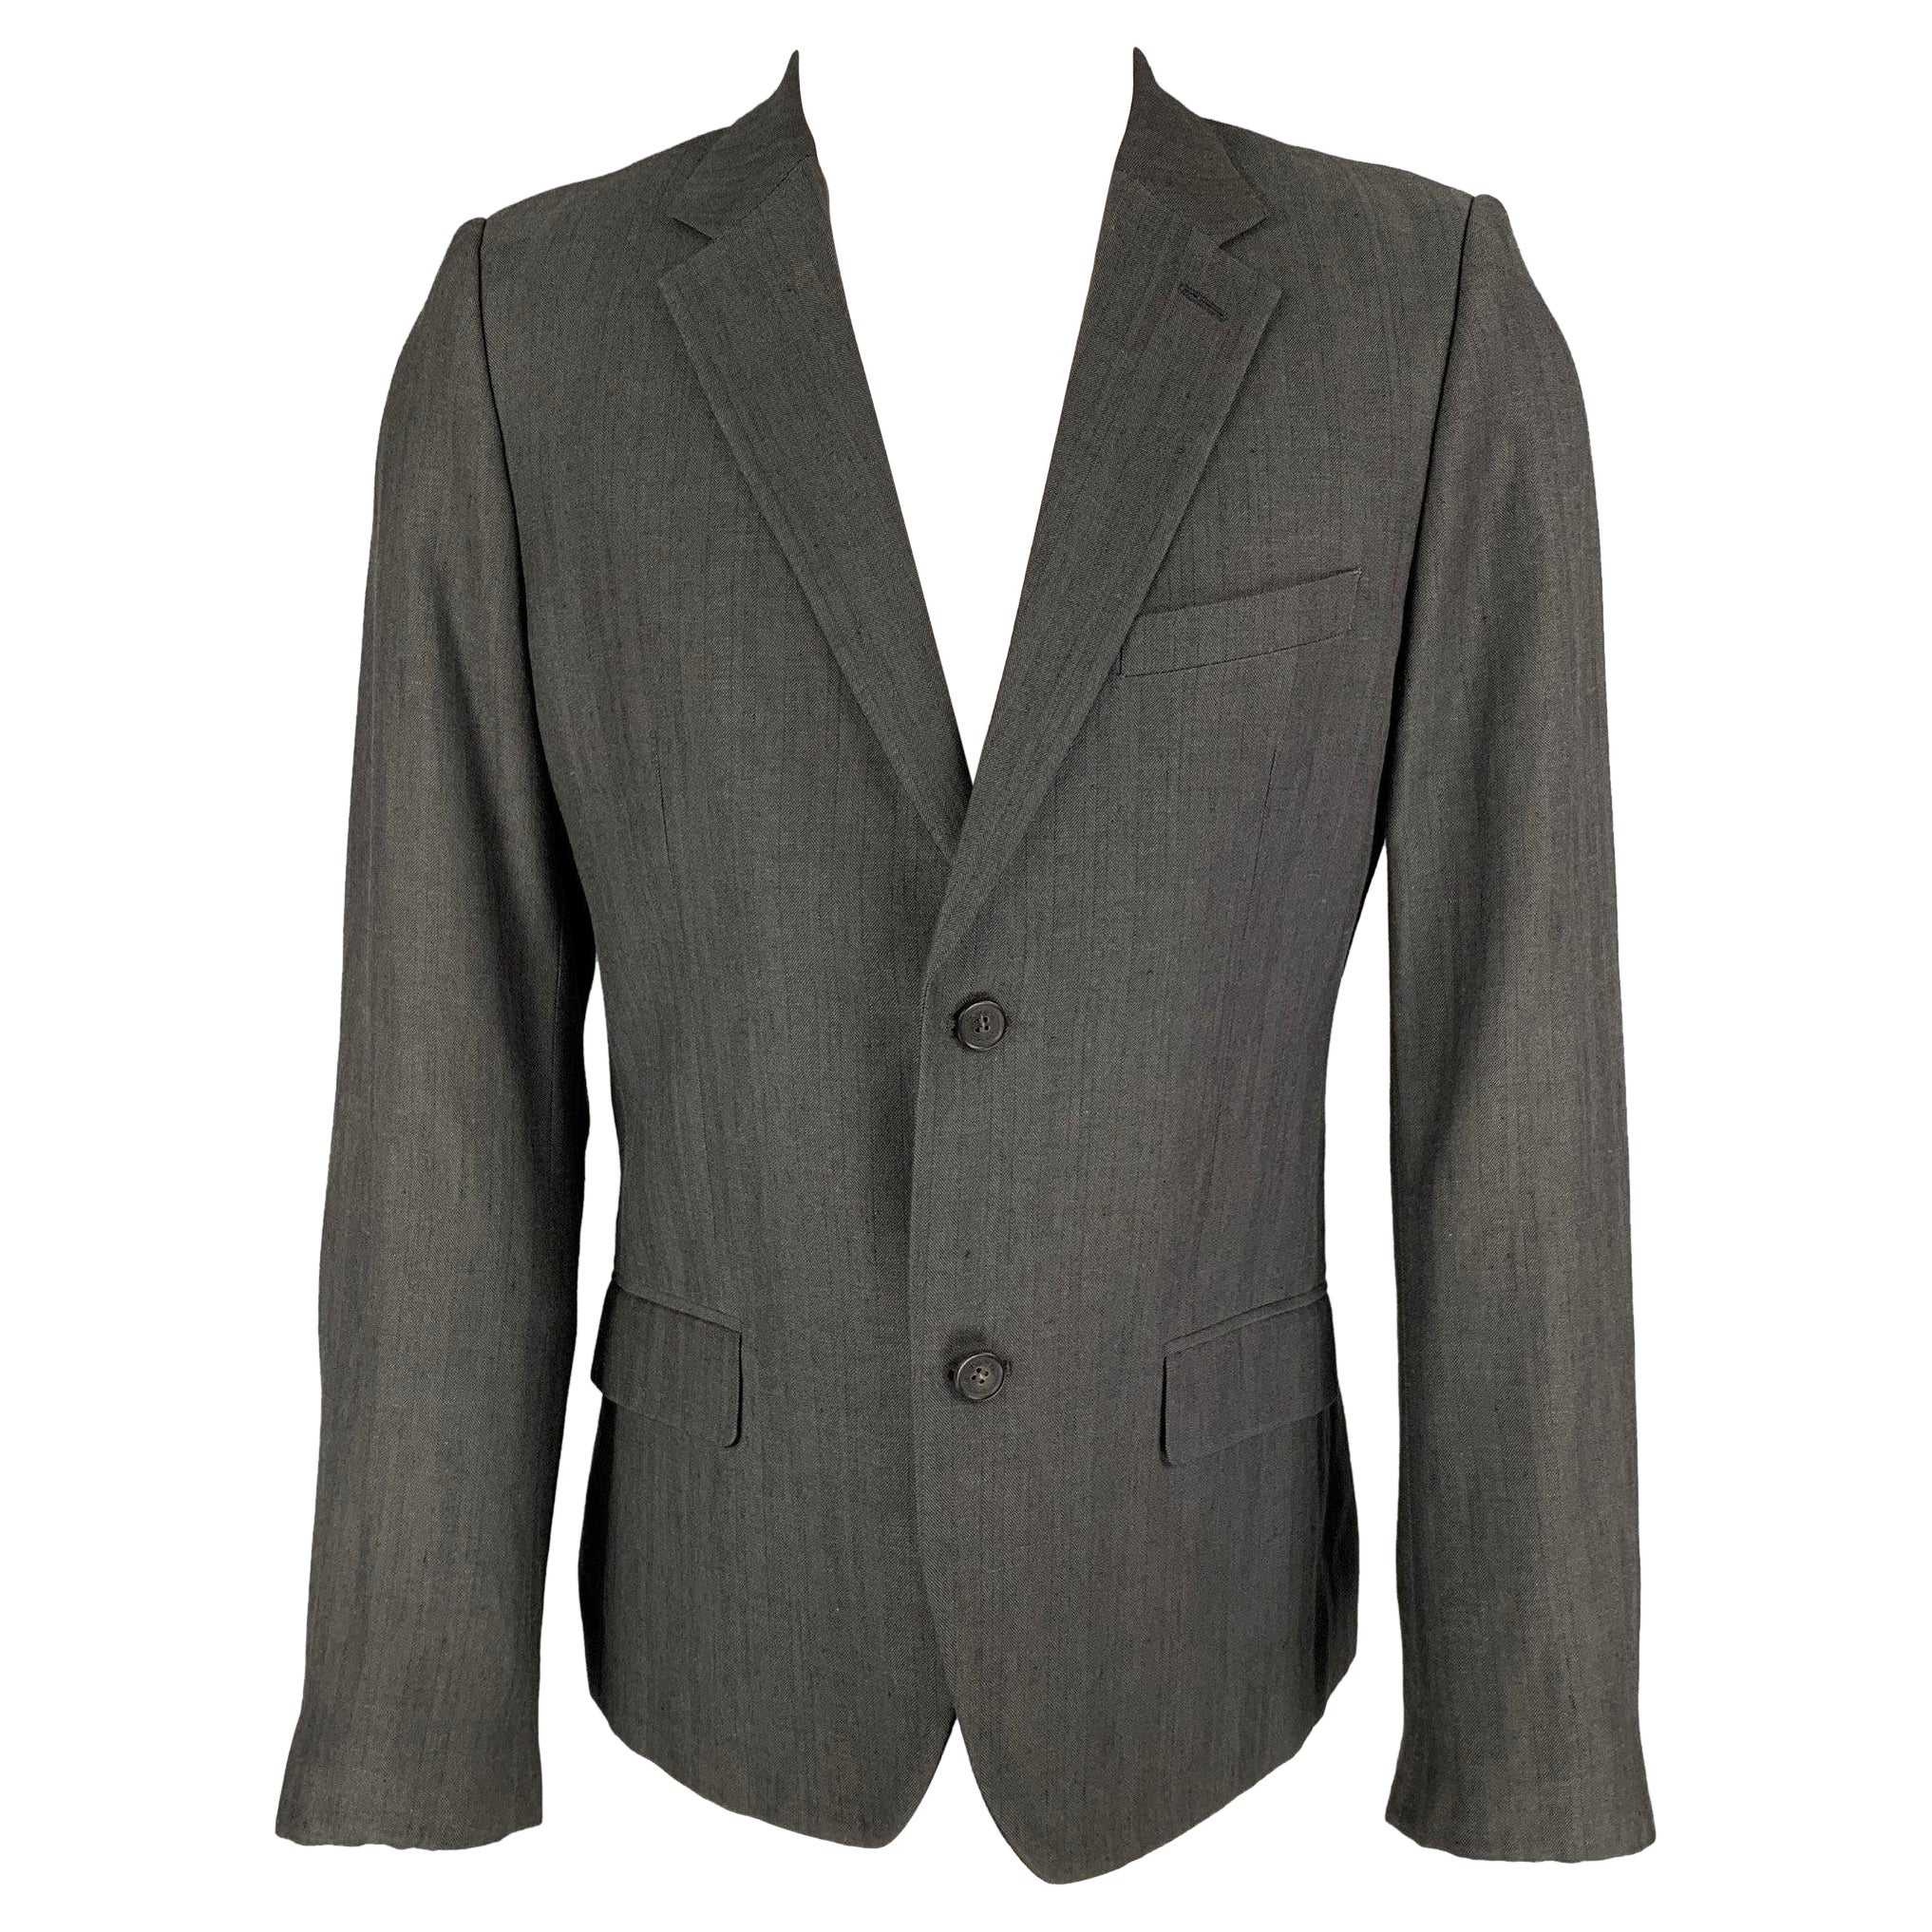 CALVIN KLEIN COLLECTION Size 38 Charcoal Wool Linen Sport Coat For Sale